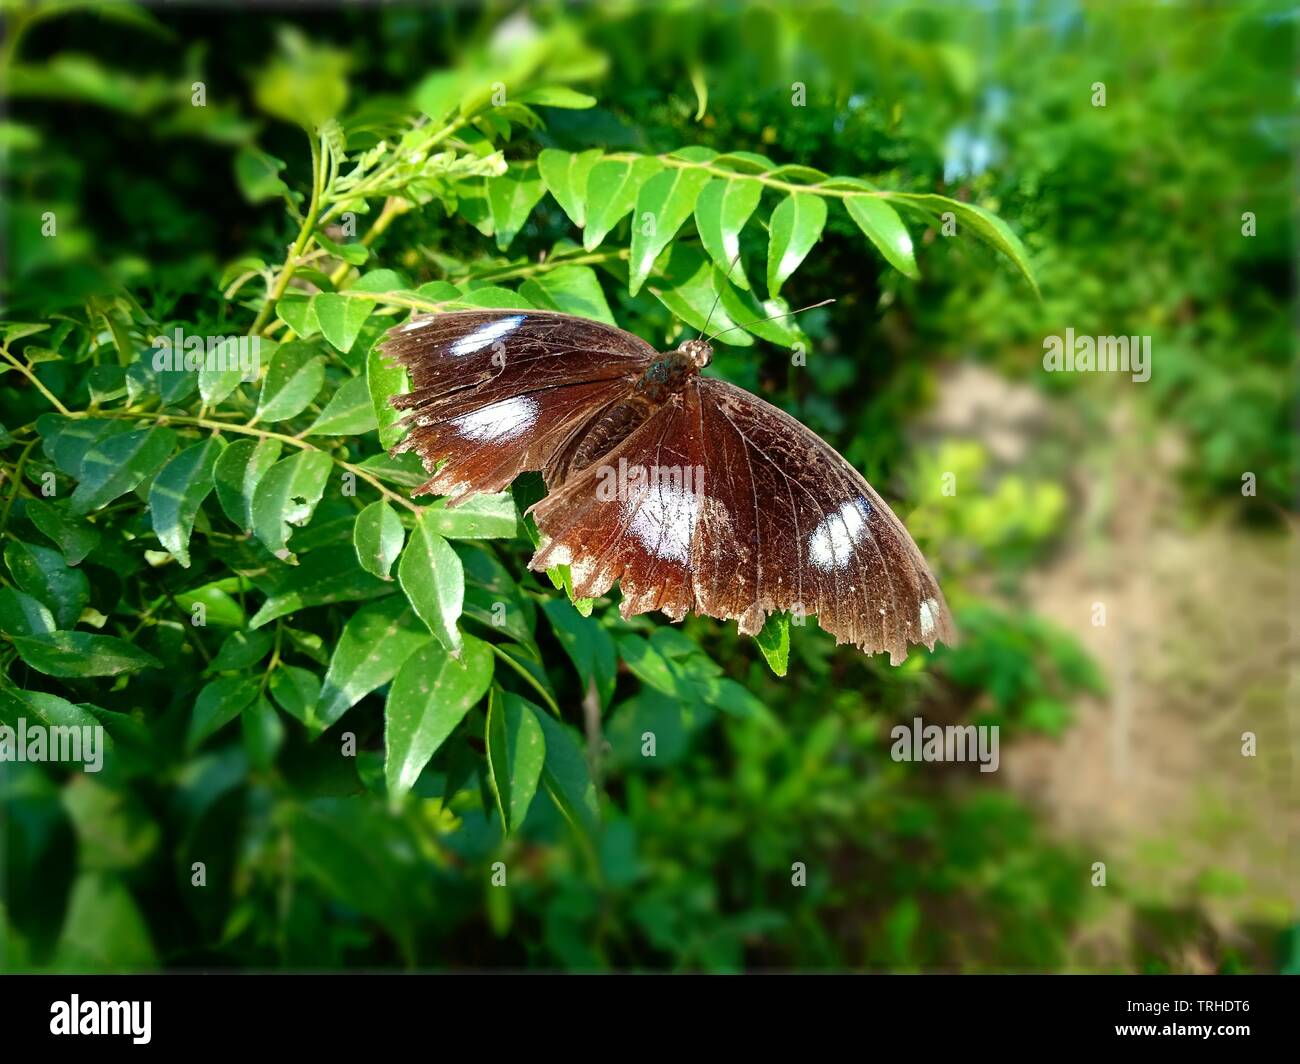 brown butterfly with white spot Stock Photo